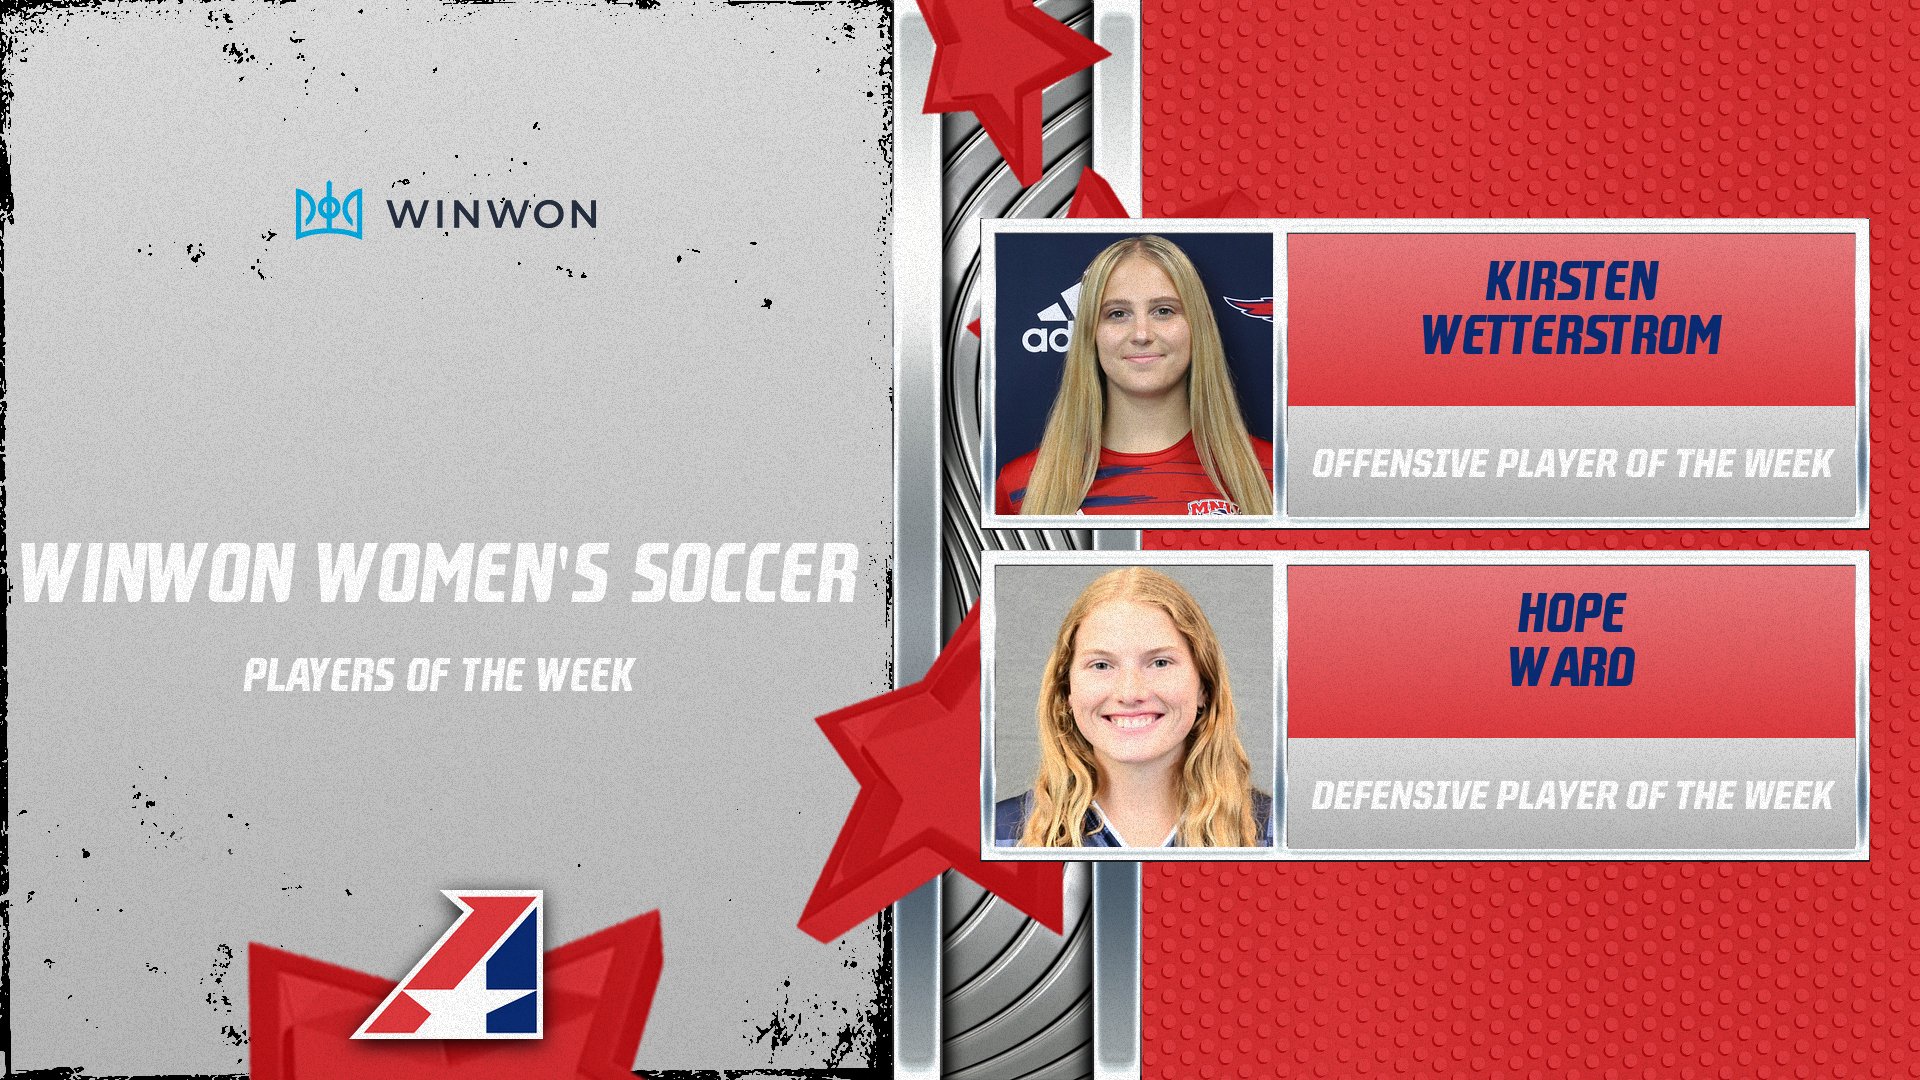 Heart Announces WinWon Women’s Soccer Players of the Week – September 18